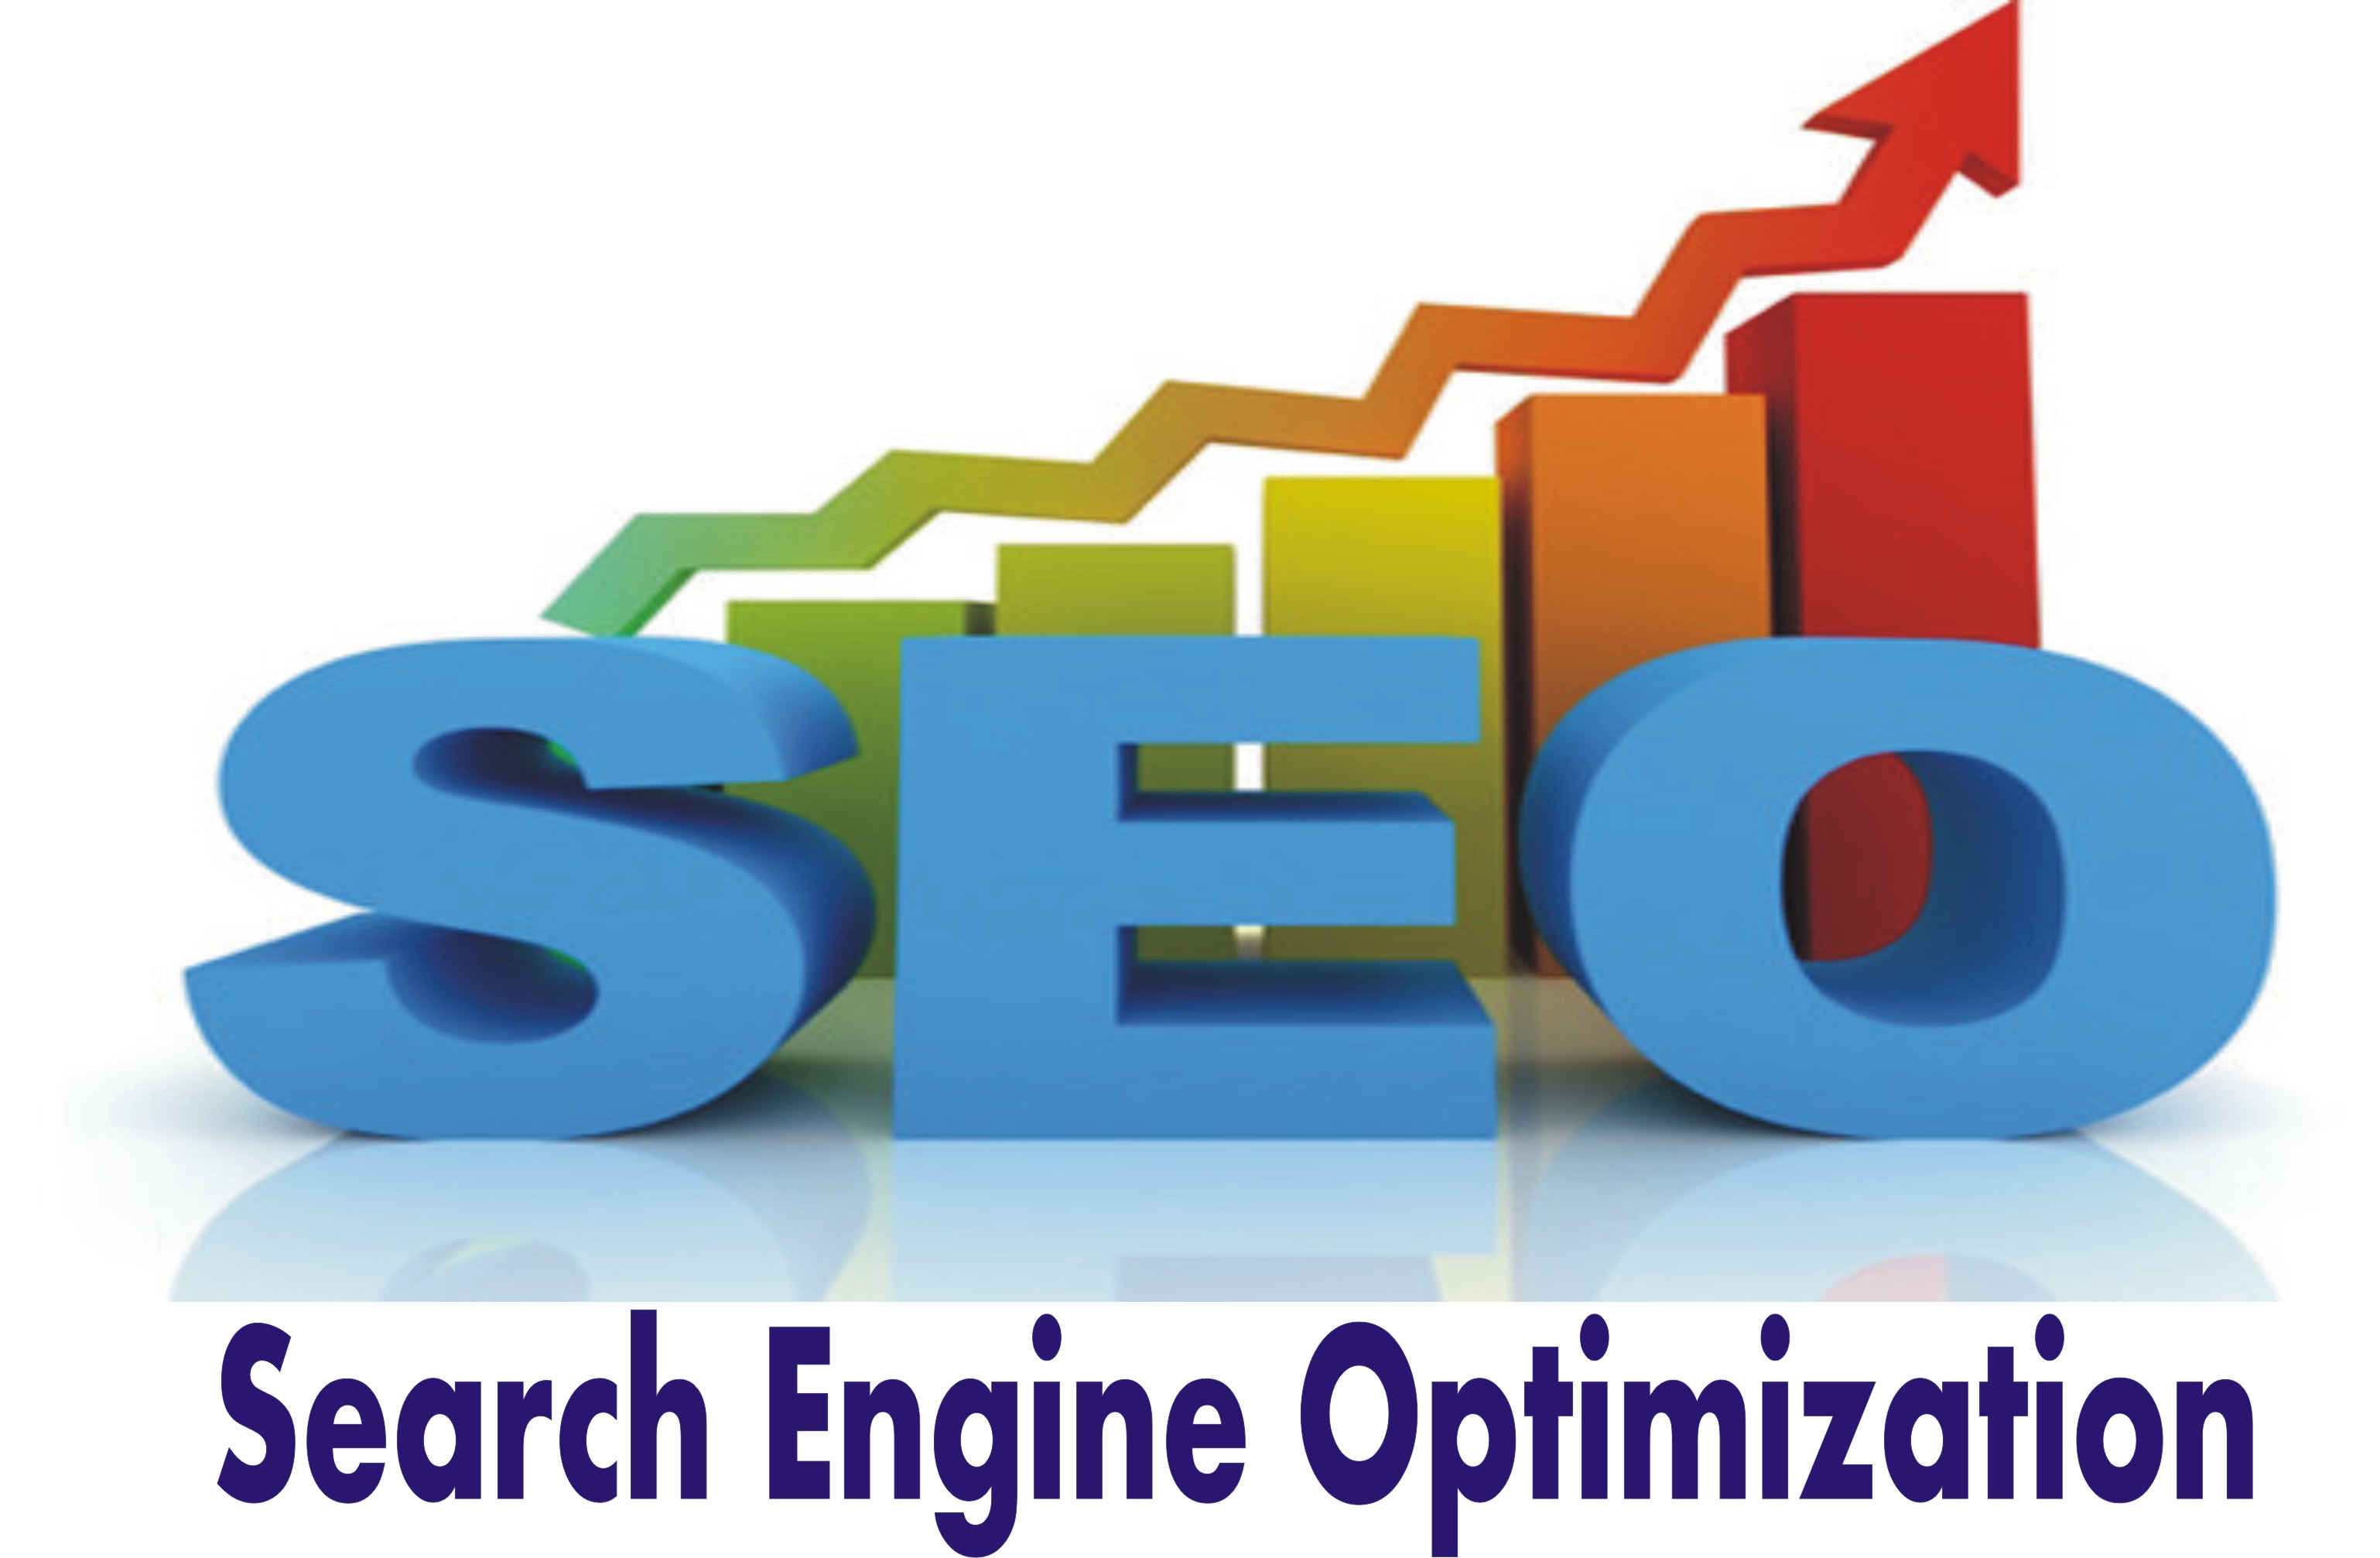 Local SEO Marketing Services - The Need of Time Services